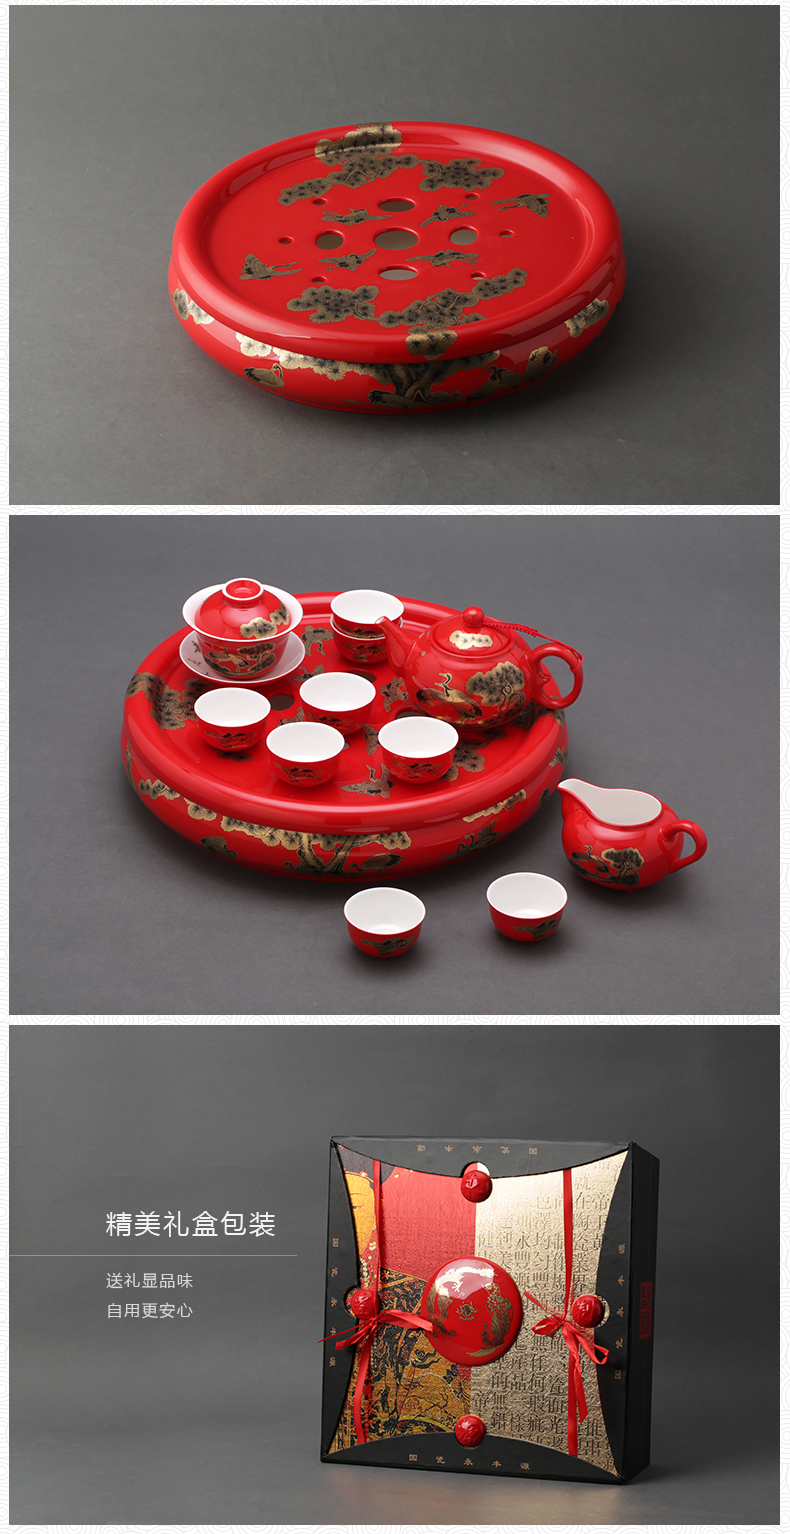 The porcelain yongfeng source cranes life last every ceramic kung fu tea sets suit The teapot tea tray cups cups